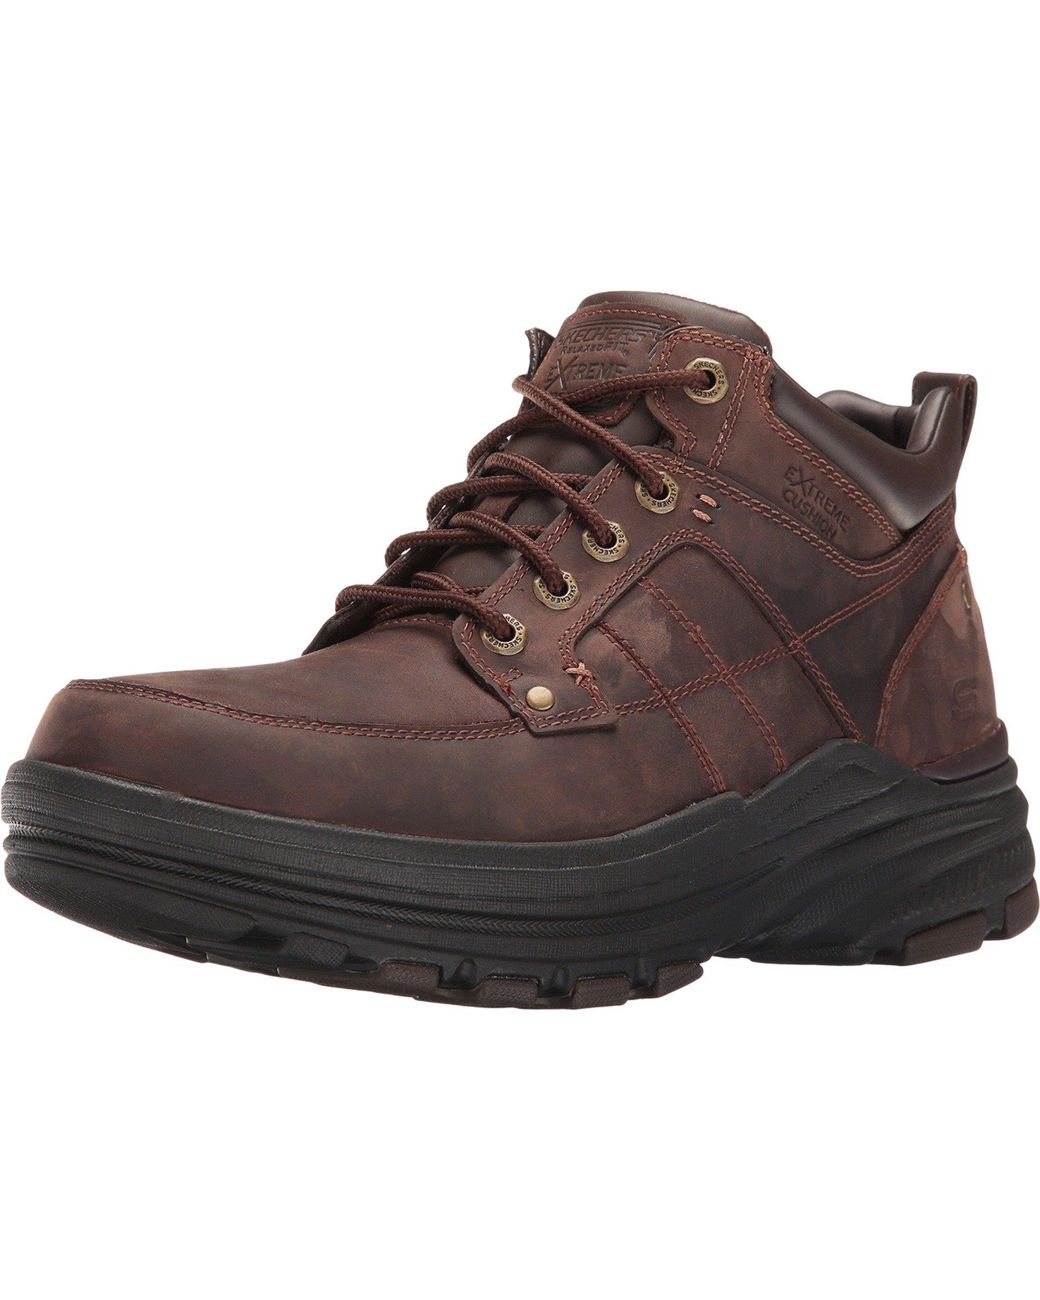 Skechers Leather Relaxed Fit Holdren - Lender in Dark Brown (Brown) for Men  - Save 9% - Lyst